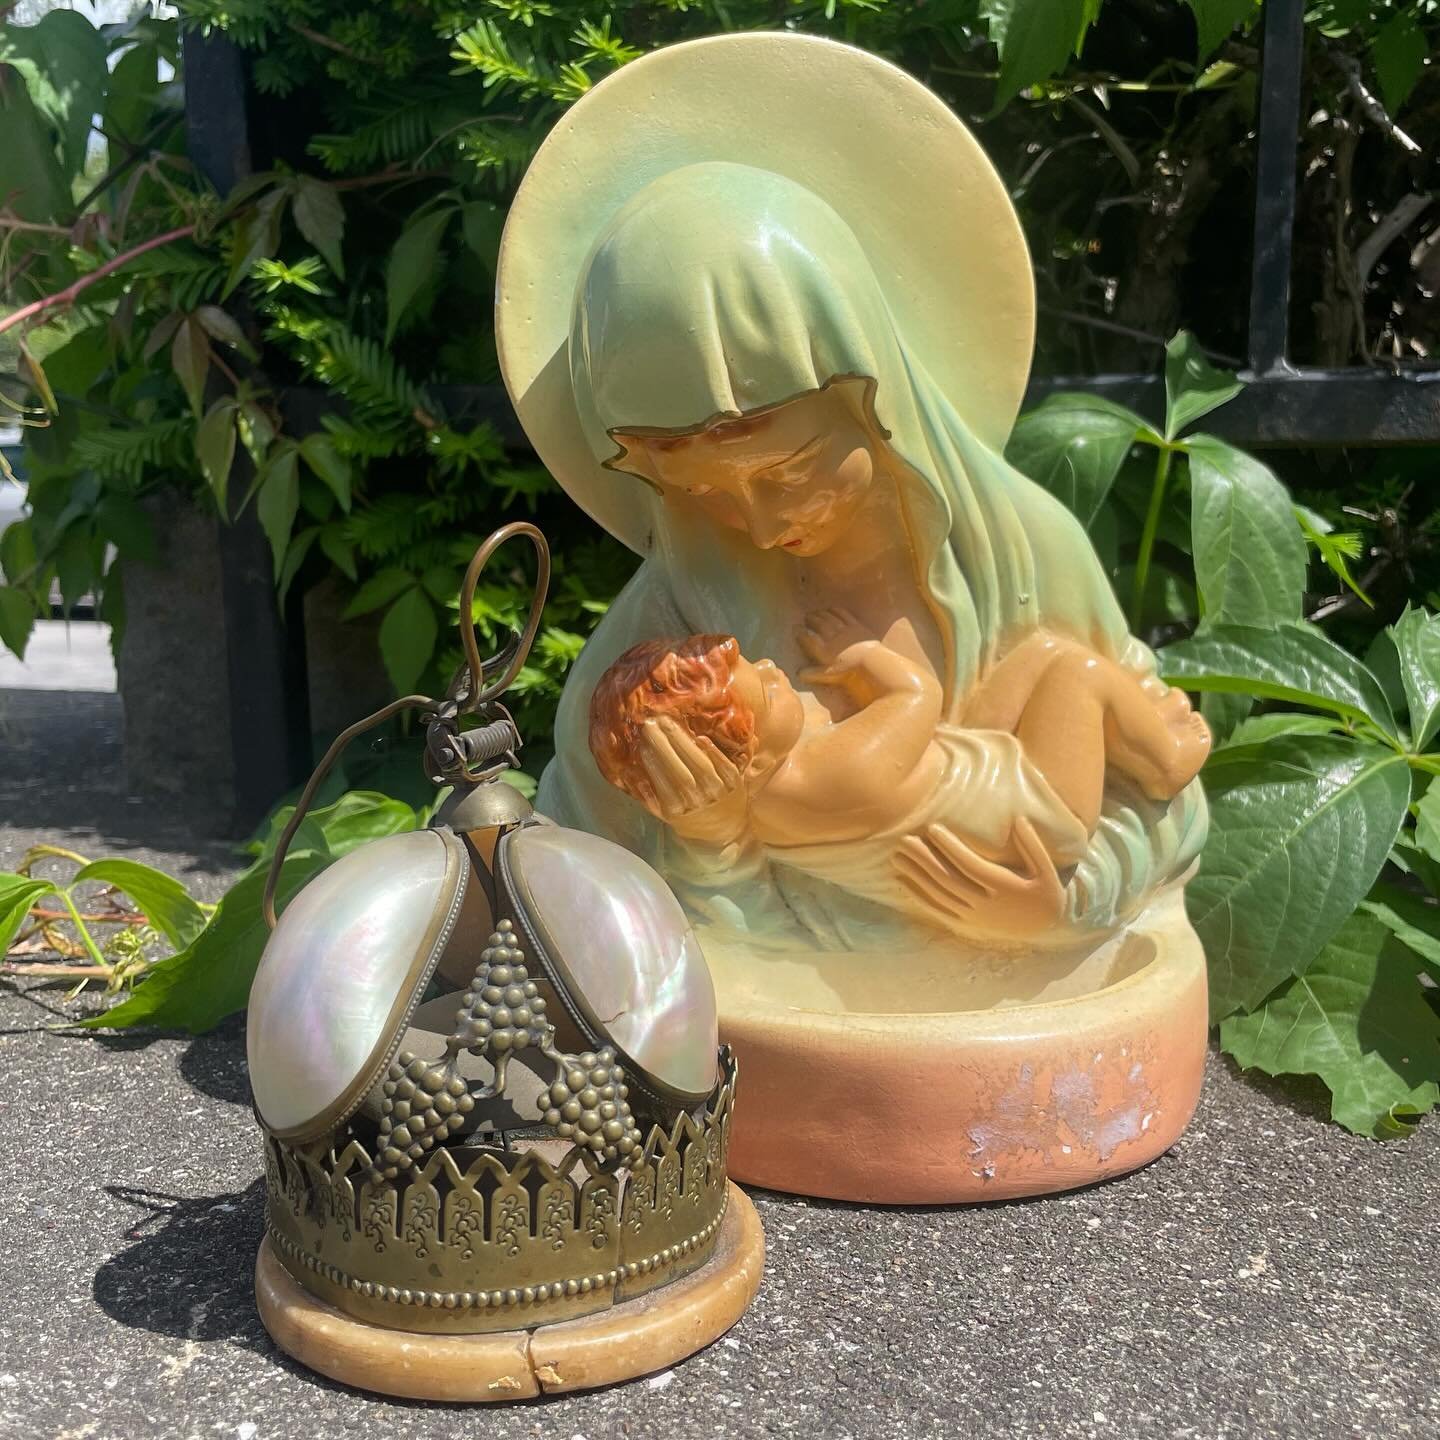 Wrapping it up today with some really pretty pieces! Chalkware Mary and Jesus, made to hang, but could also serve as a catchall, 9.5&rdquo; tall, 6&rdquo; wide, $35. Victorian ornate call bell, 5.5&rdquo; tall, 3.5&rdquo; wide, $140.